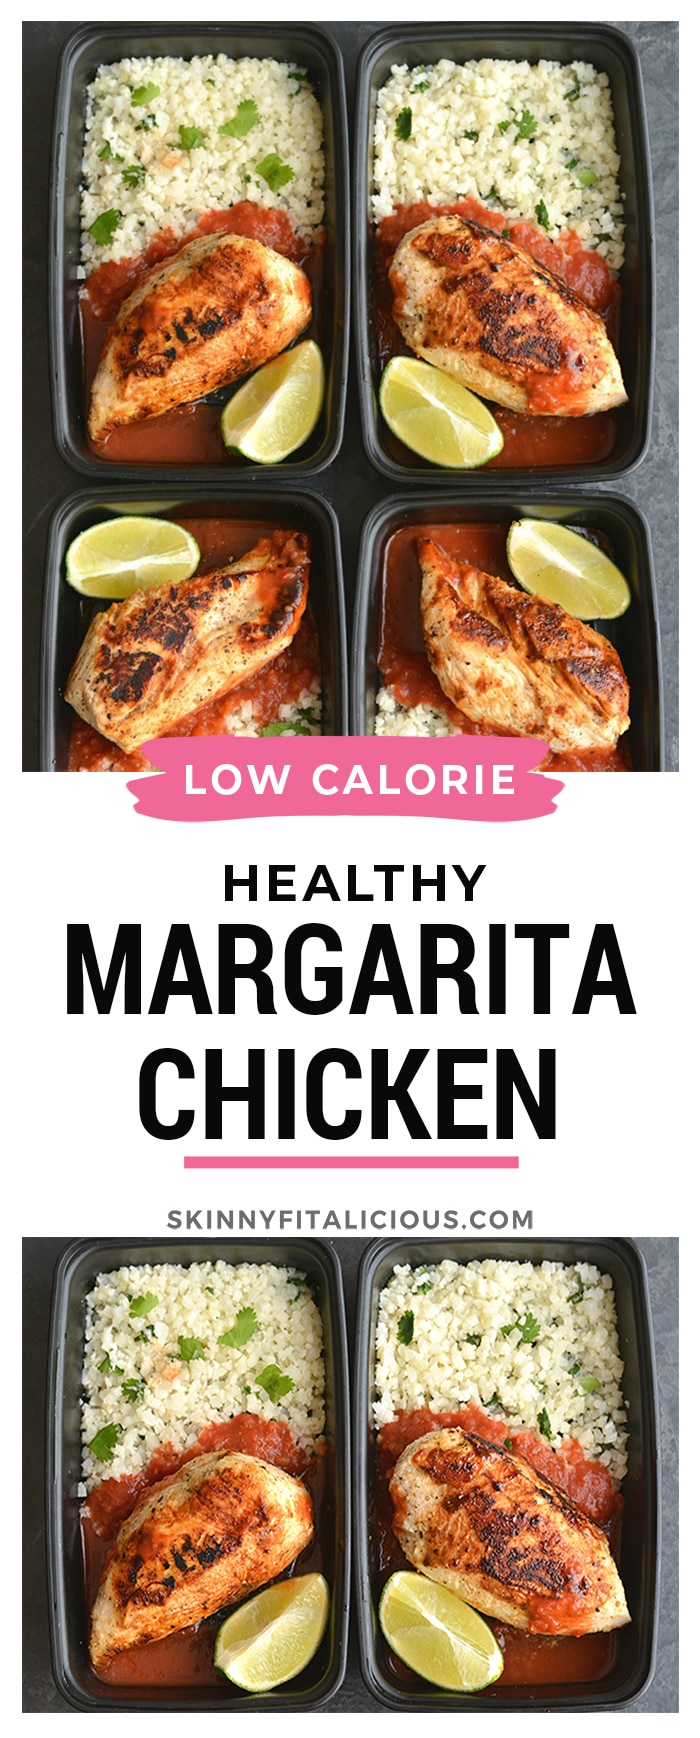 Margarita Chicken! This lightened up chicken is marinated and cooked in a skillet with spices. Paired with cilantro lime cauliflower rice and salsa for an EASY, low carb dinner or lunch.